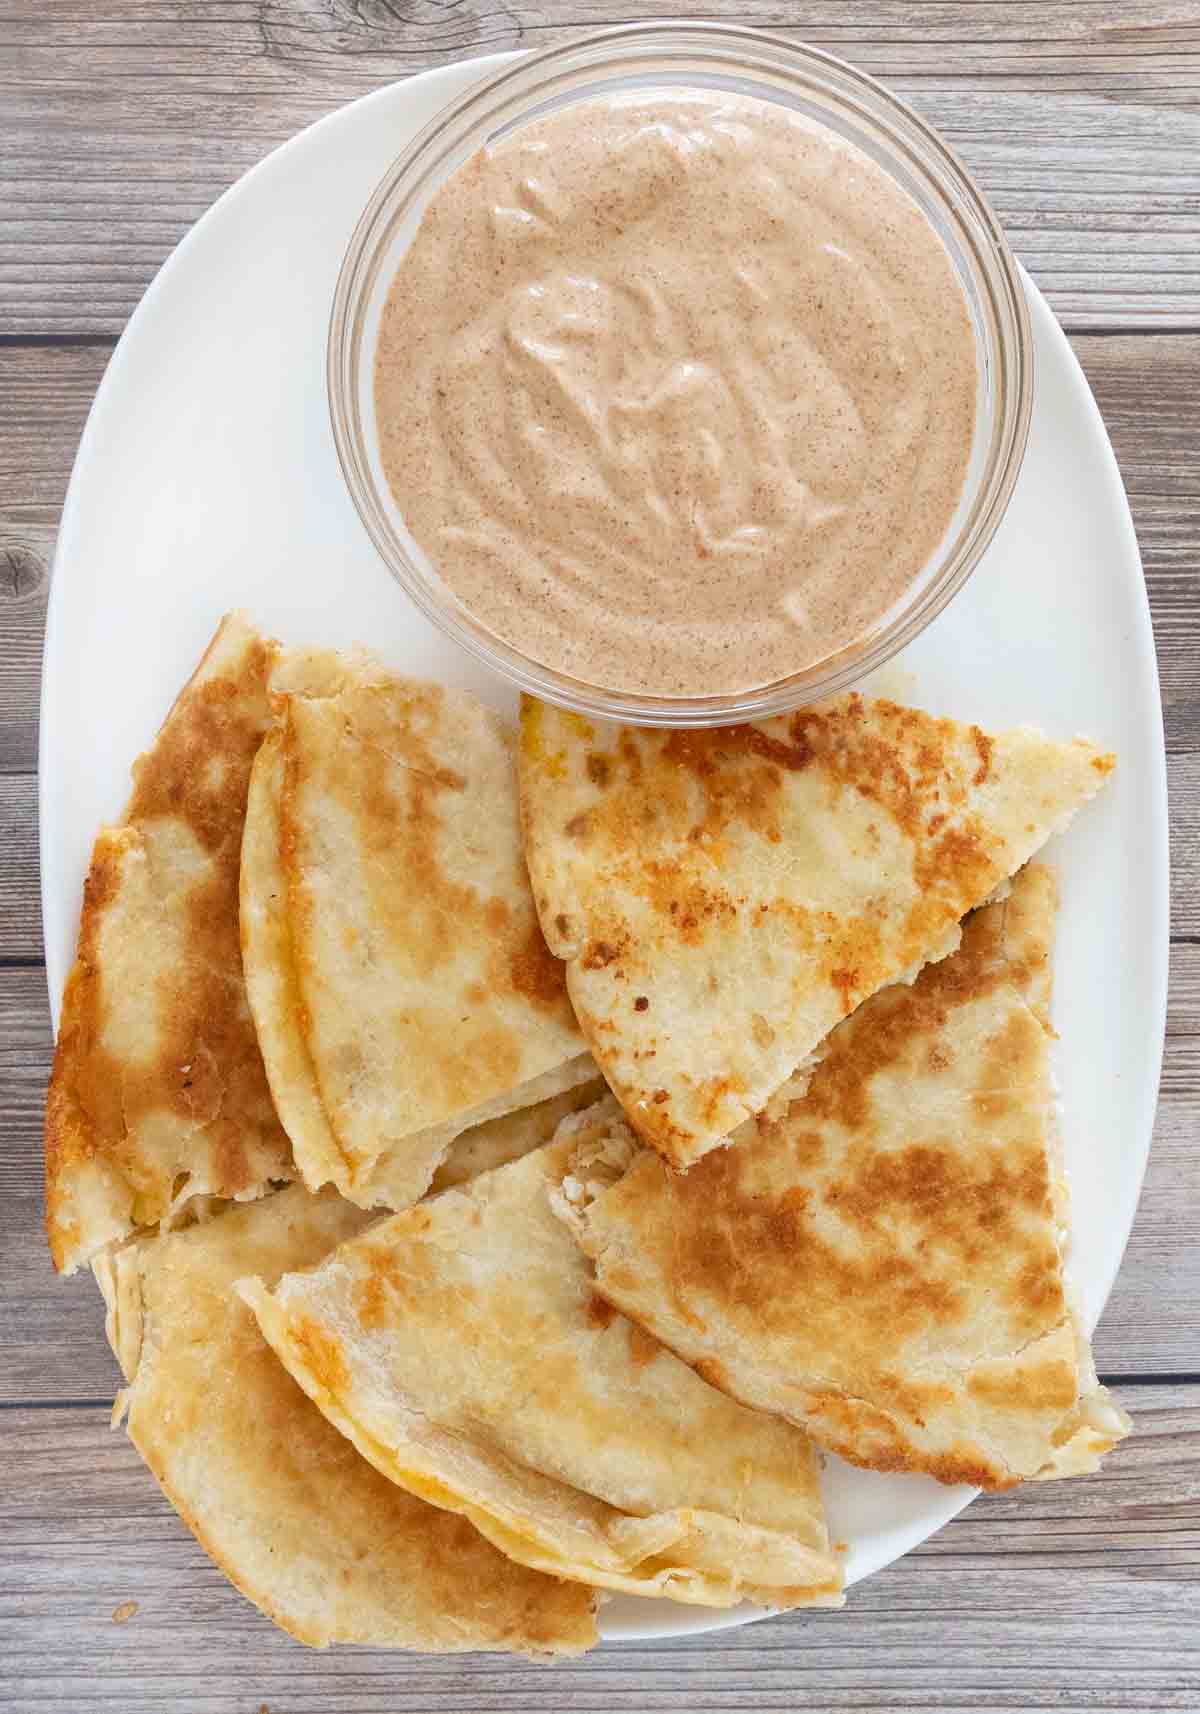 Quesadilla sauce with cut up quesadilla on white platter.